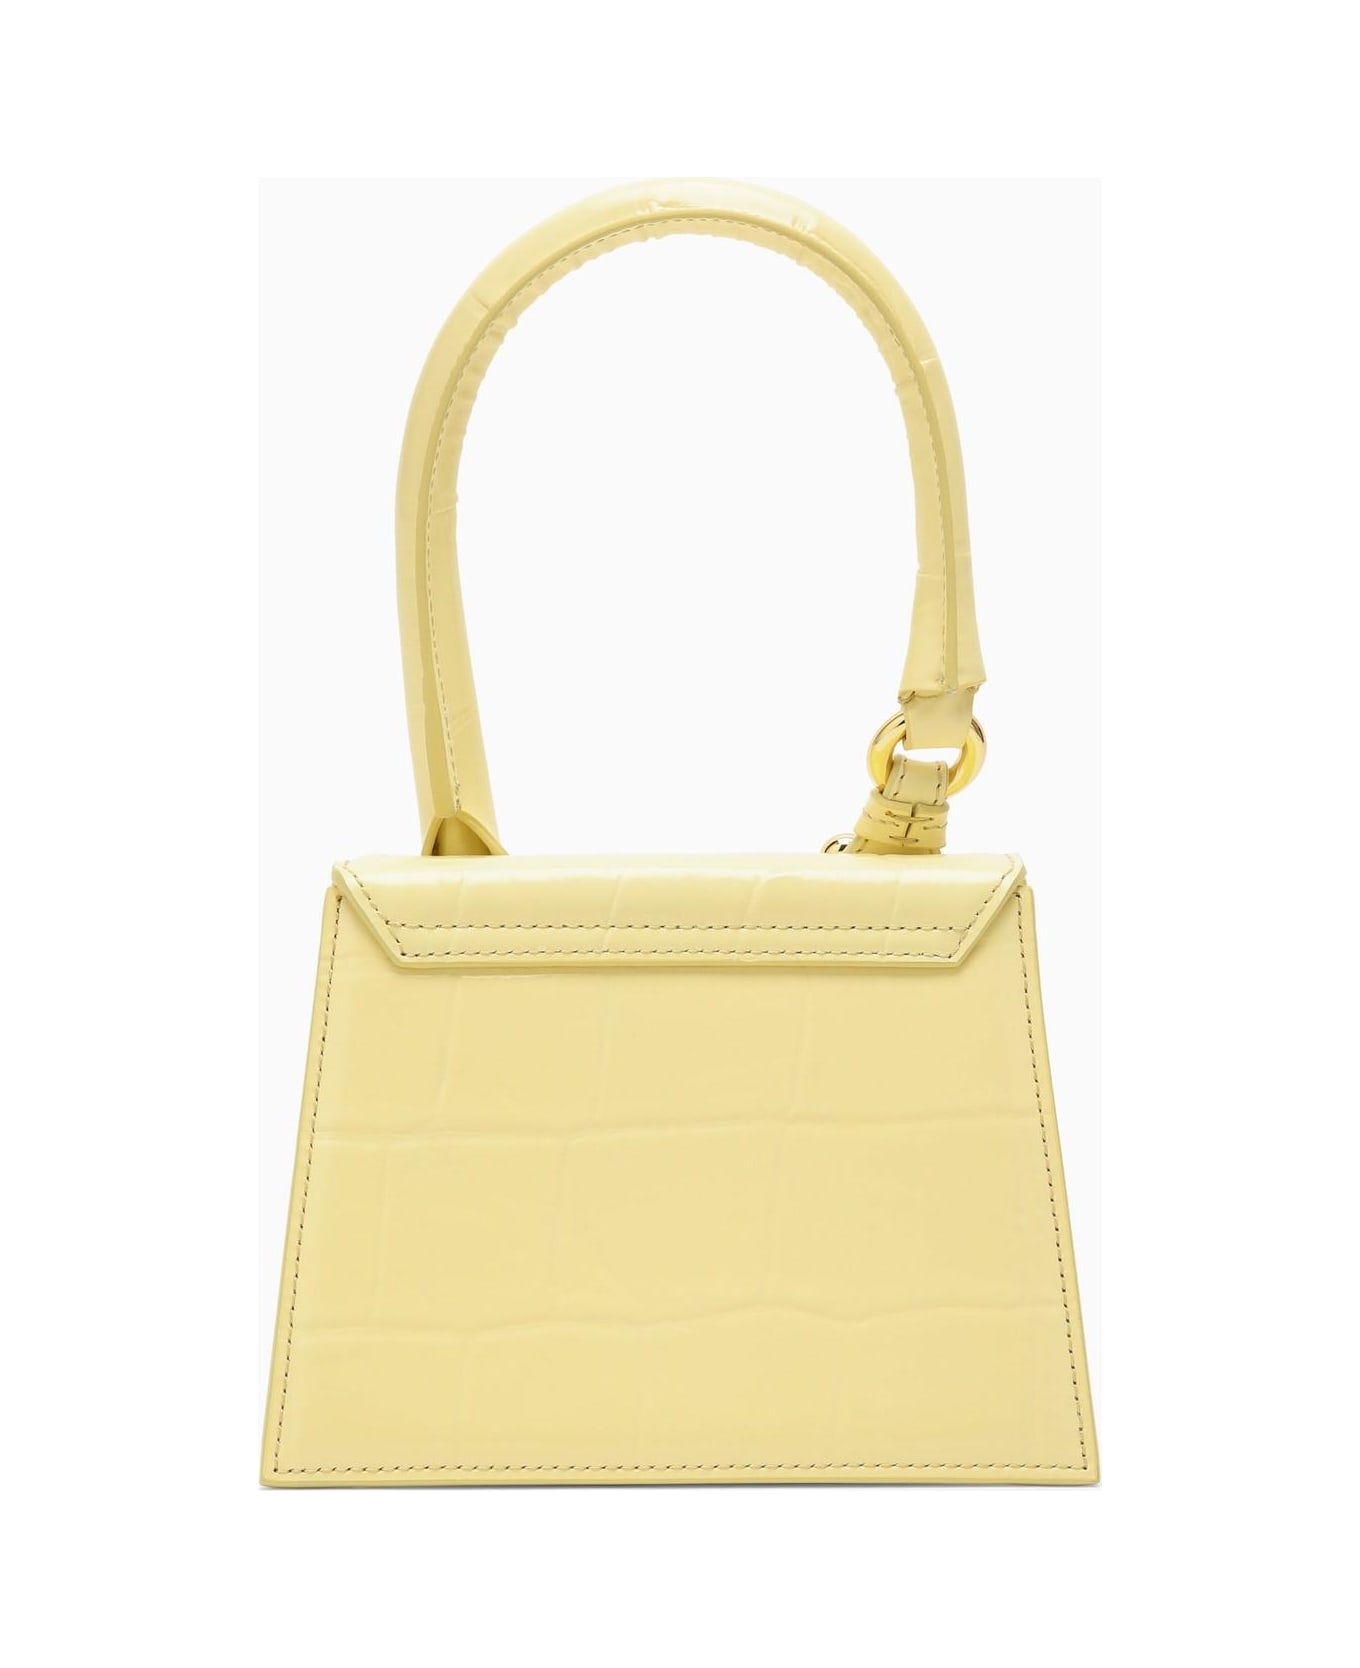 Jacquemus Le Chiquito Moyen Boucle Light Yellow Embossed Leather Bag - YELLOW